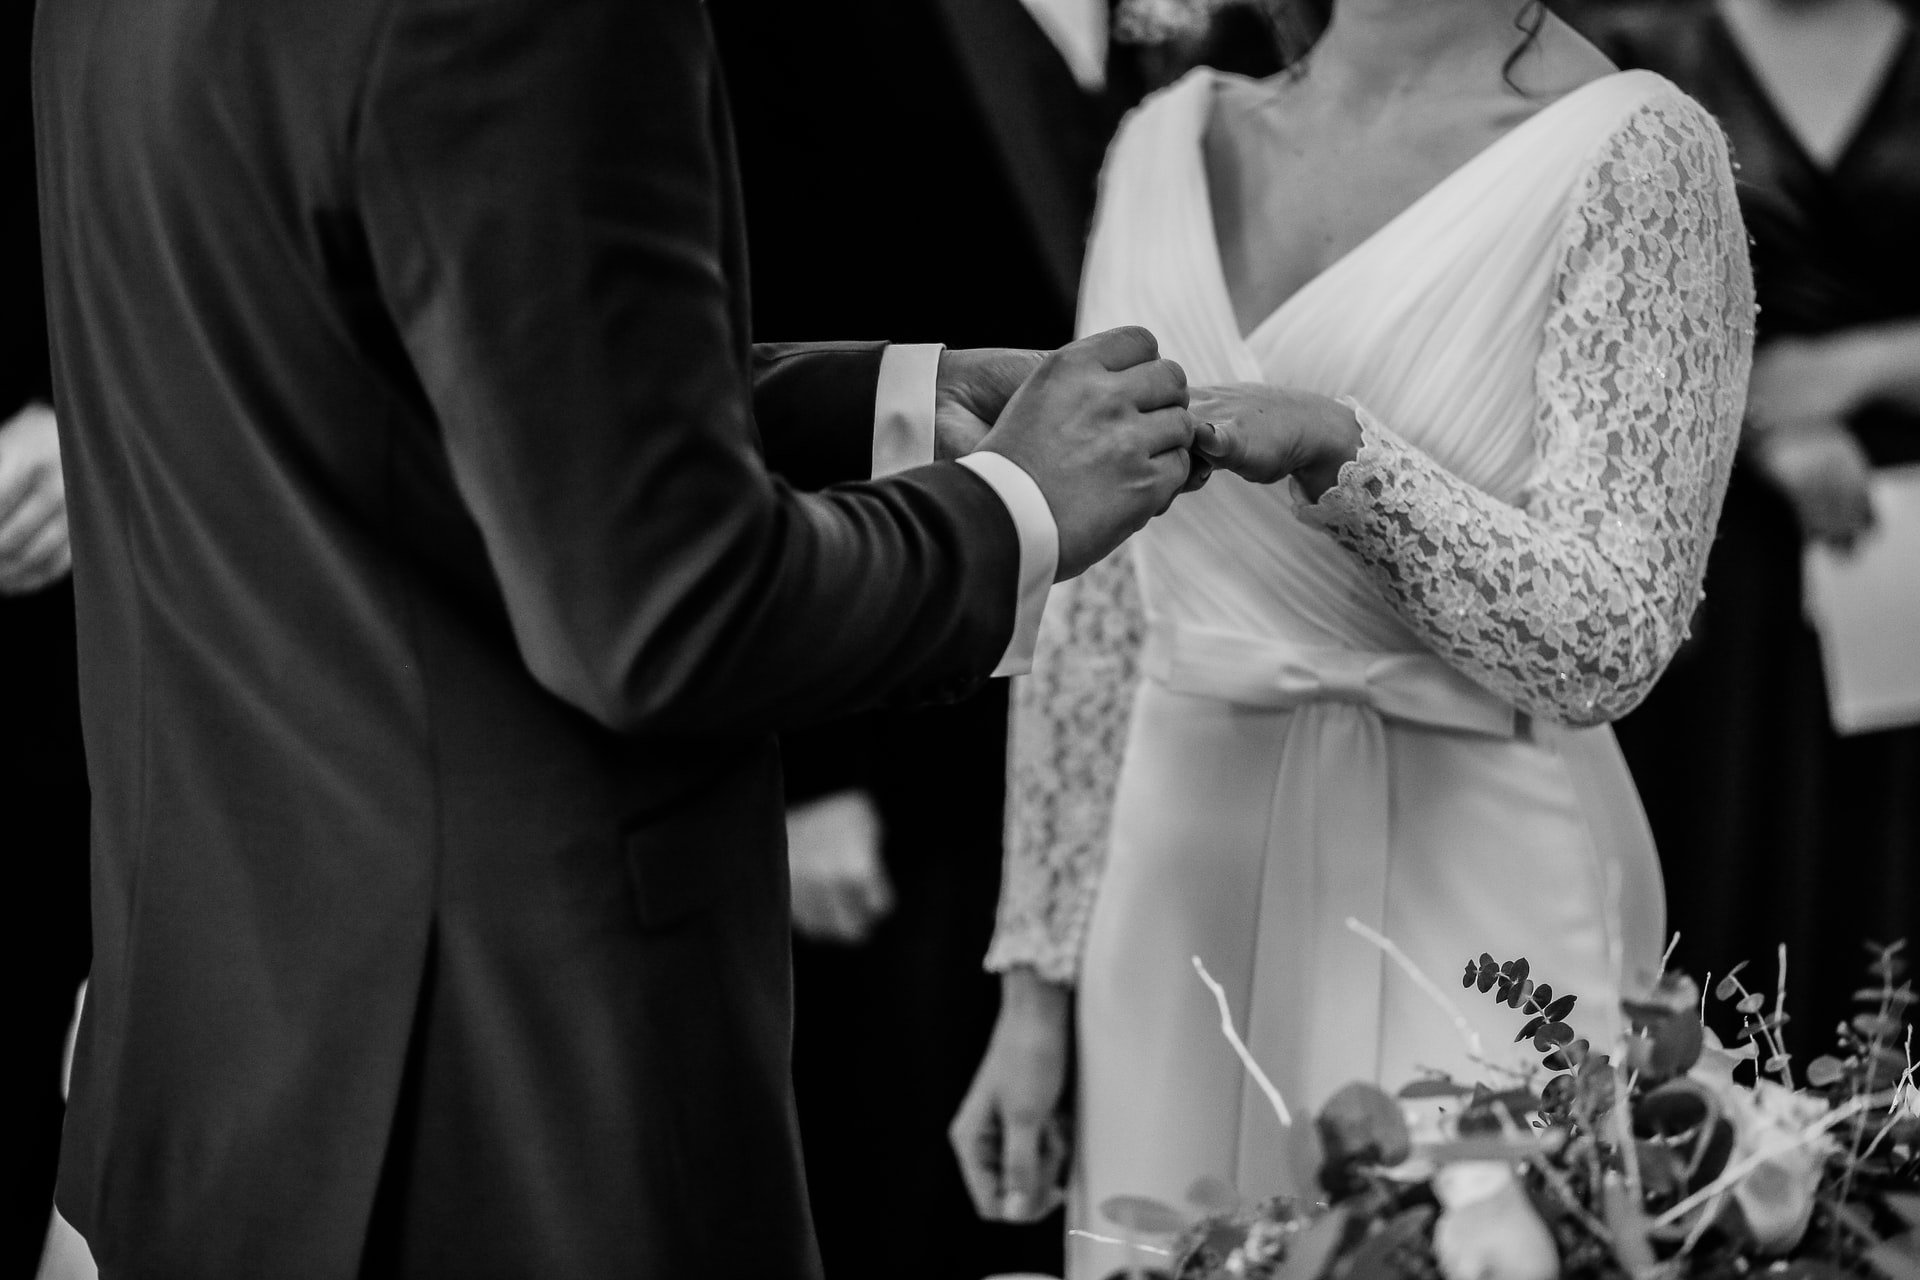 He married Sonya in his parents' absence. | Source: Unsplash